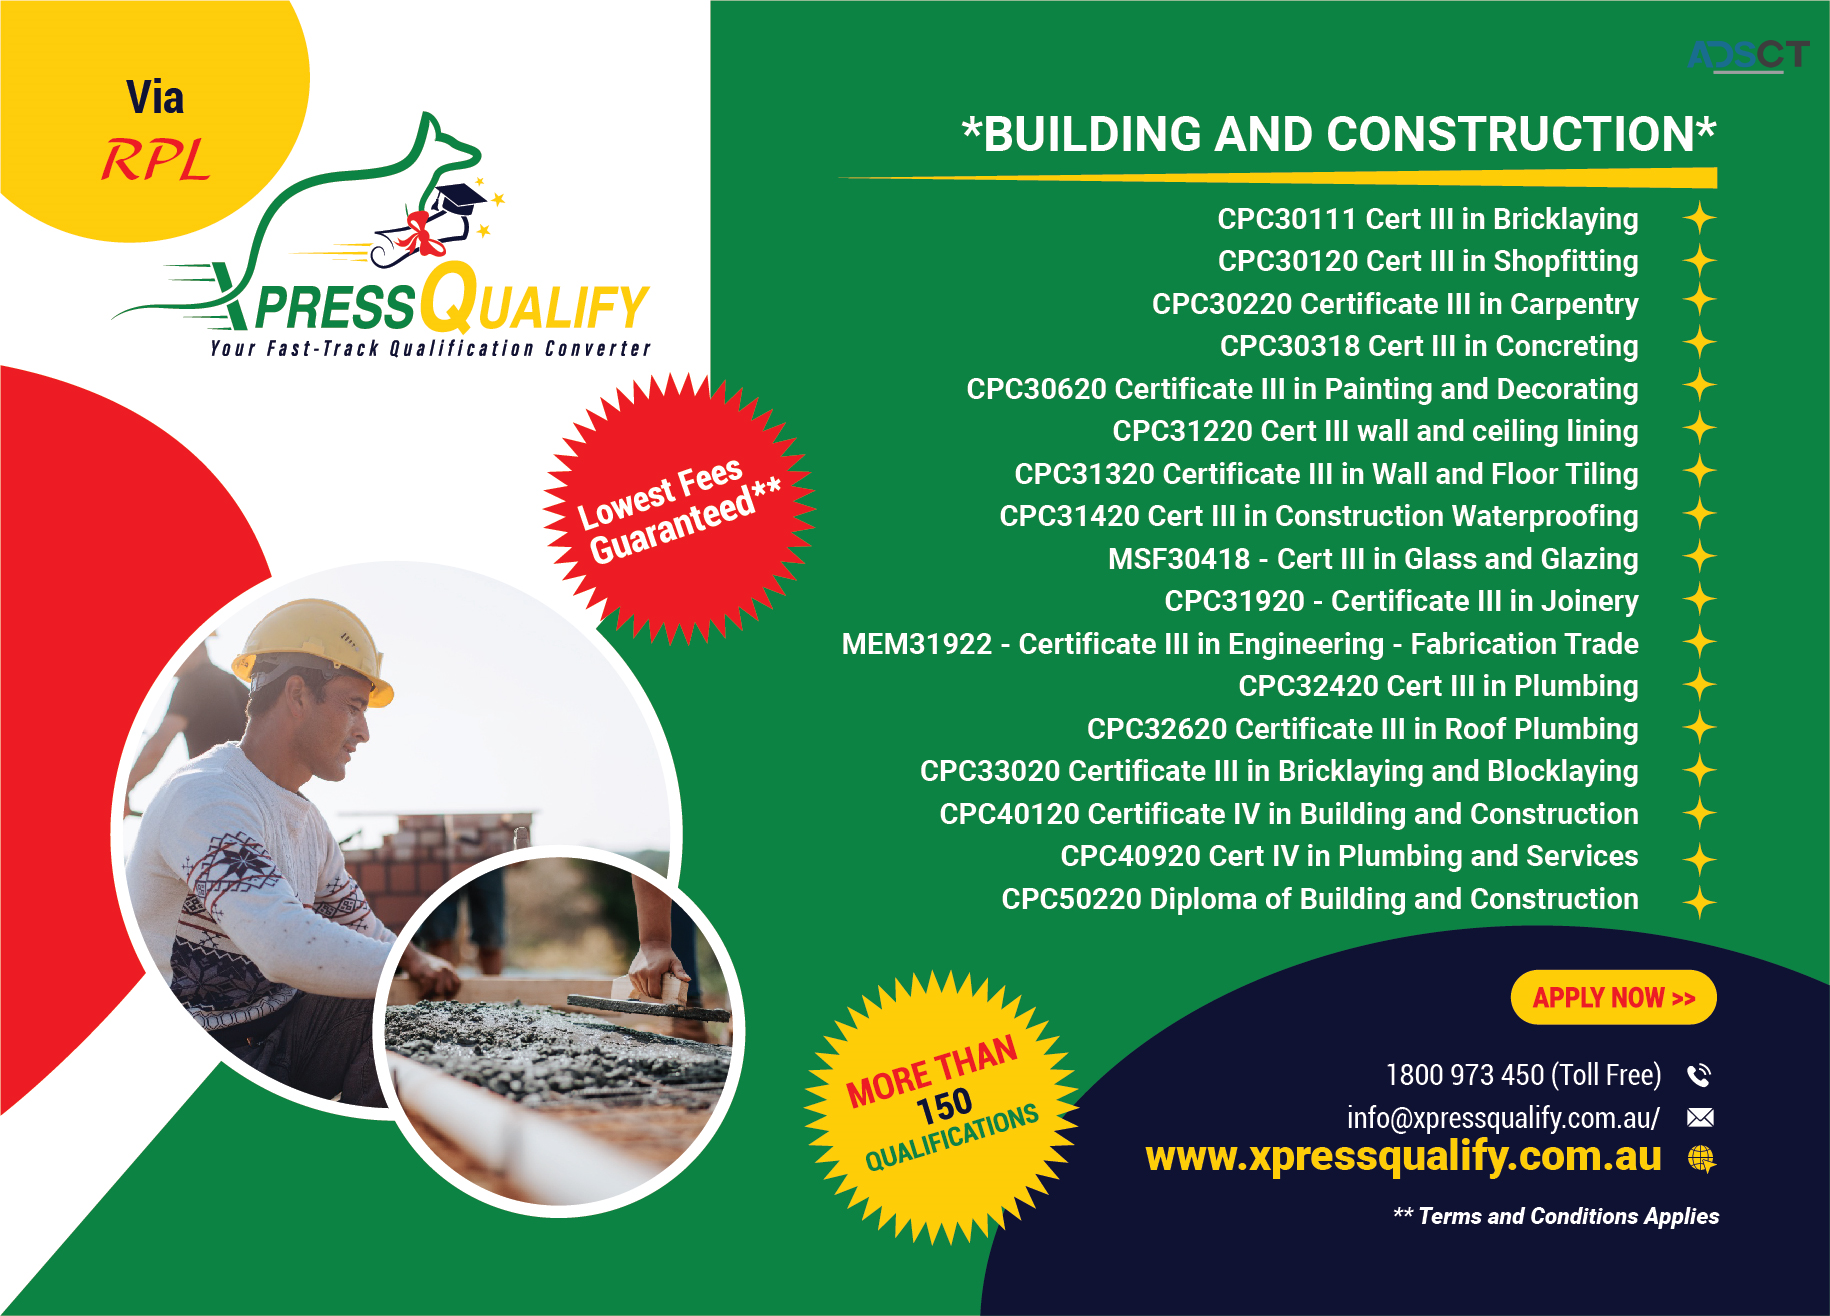 Are You Looking for the Fastest and Cheapest RPL Qualification?